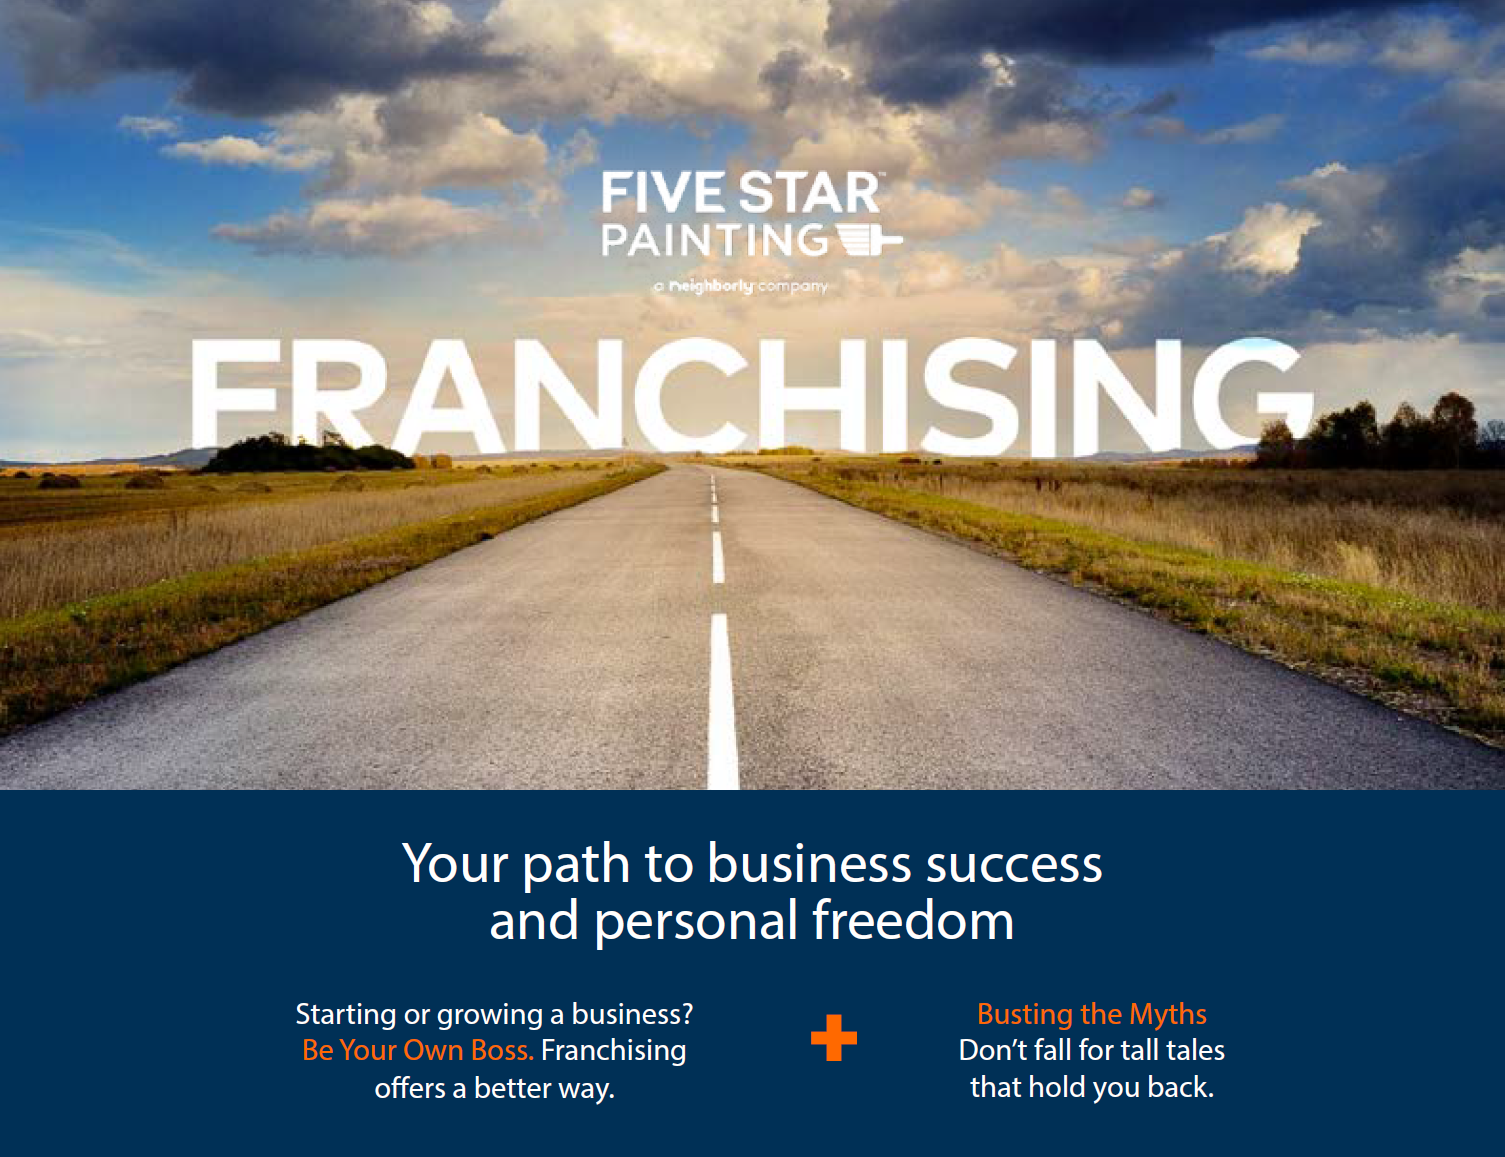 FS-FSP-franchising-a-path-to-your-future